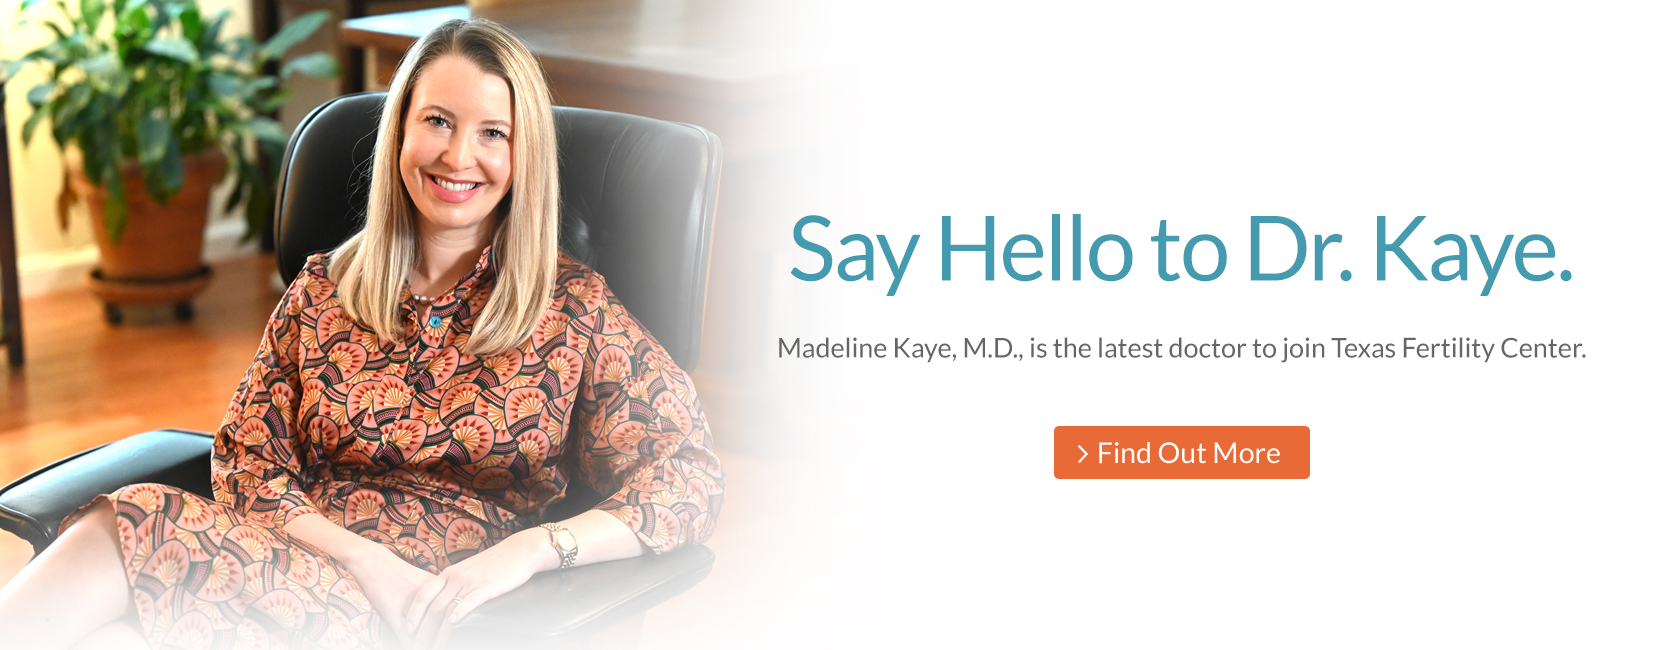 Say Hello to Dr. Kaye as she joins Texas Fertility Center